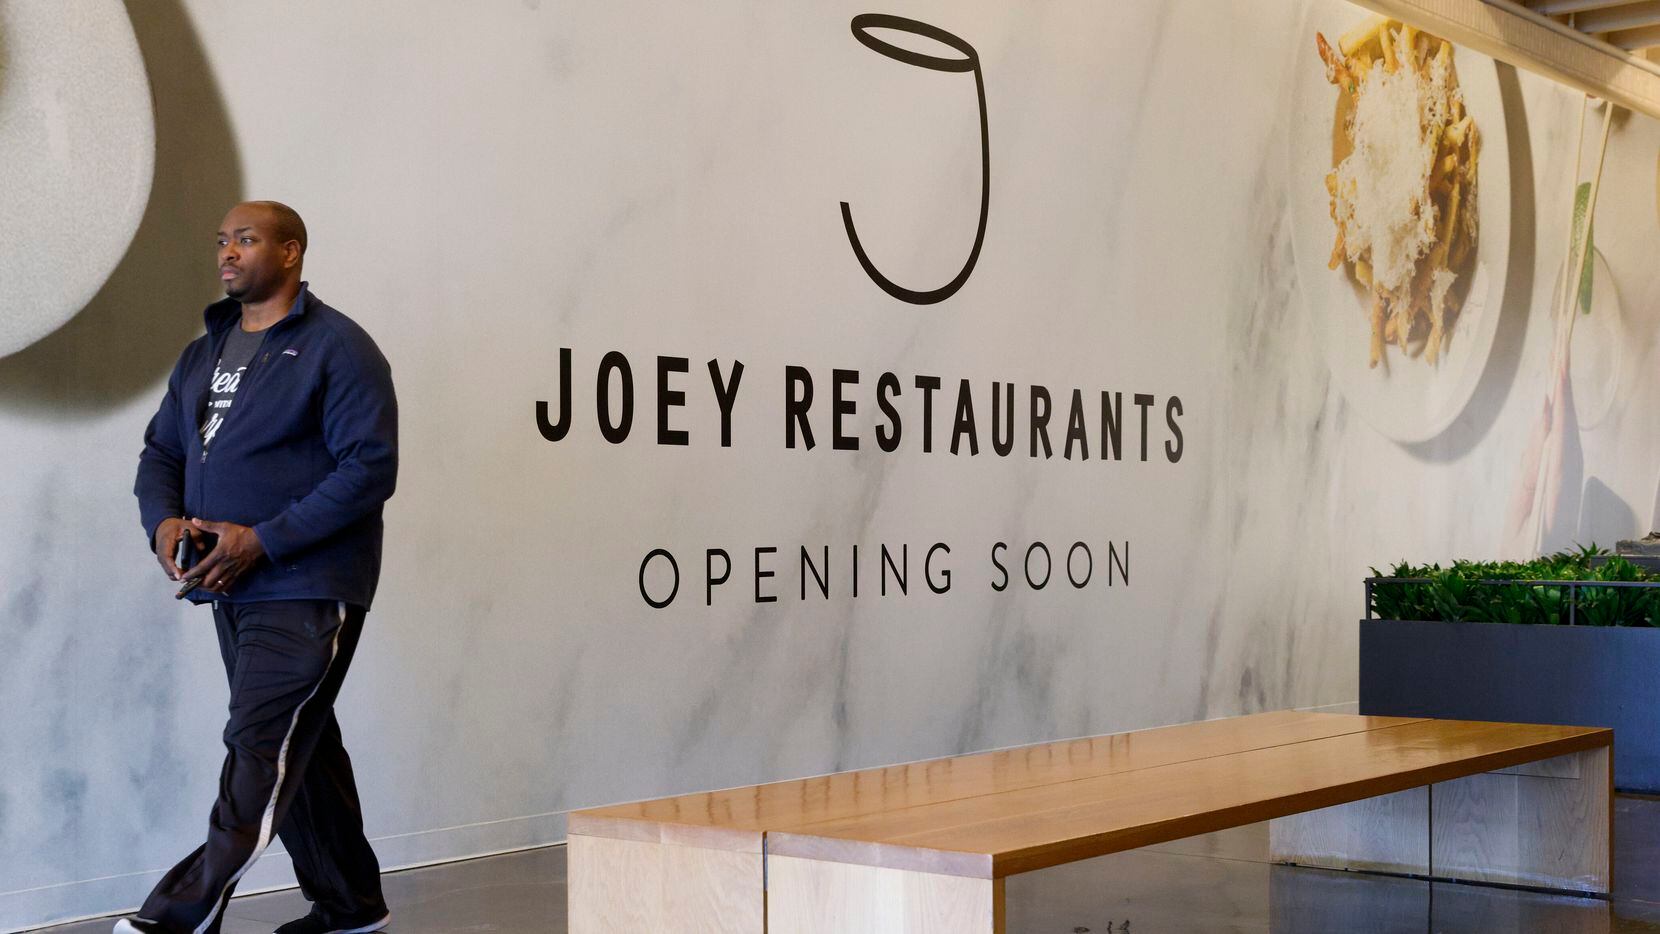 A barricade inside NorthPark Center announces that a restaurant named Joey is "opening soon"...